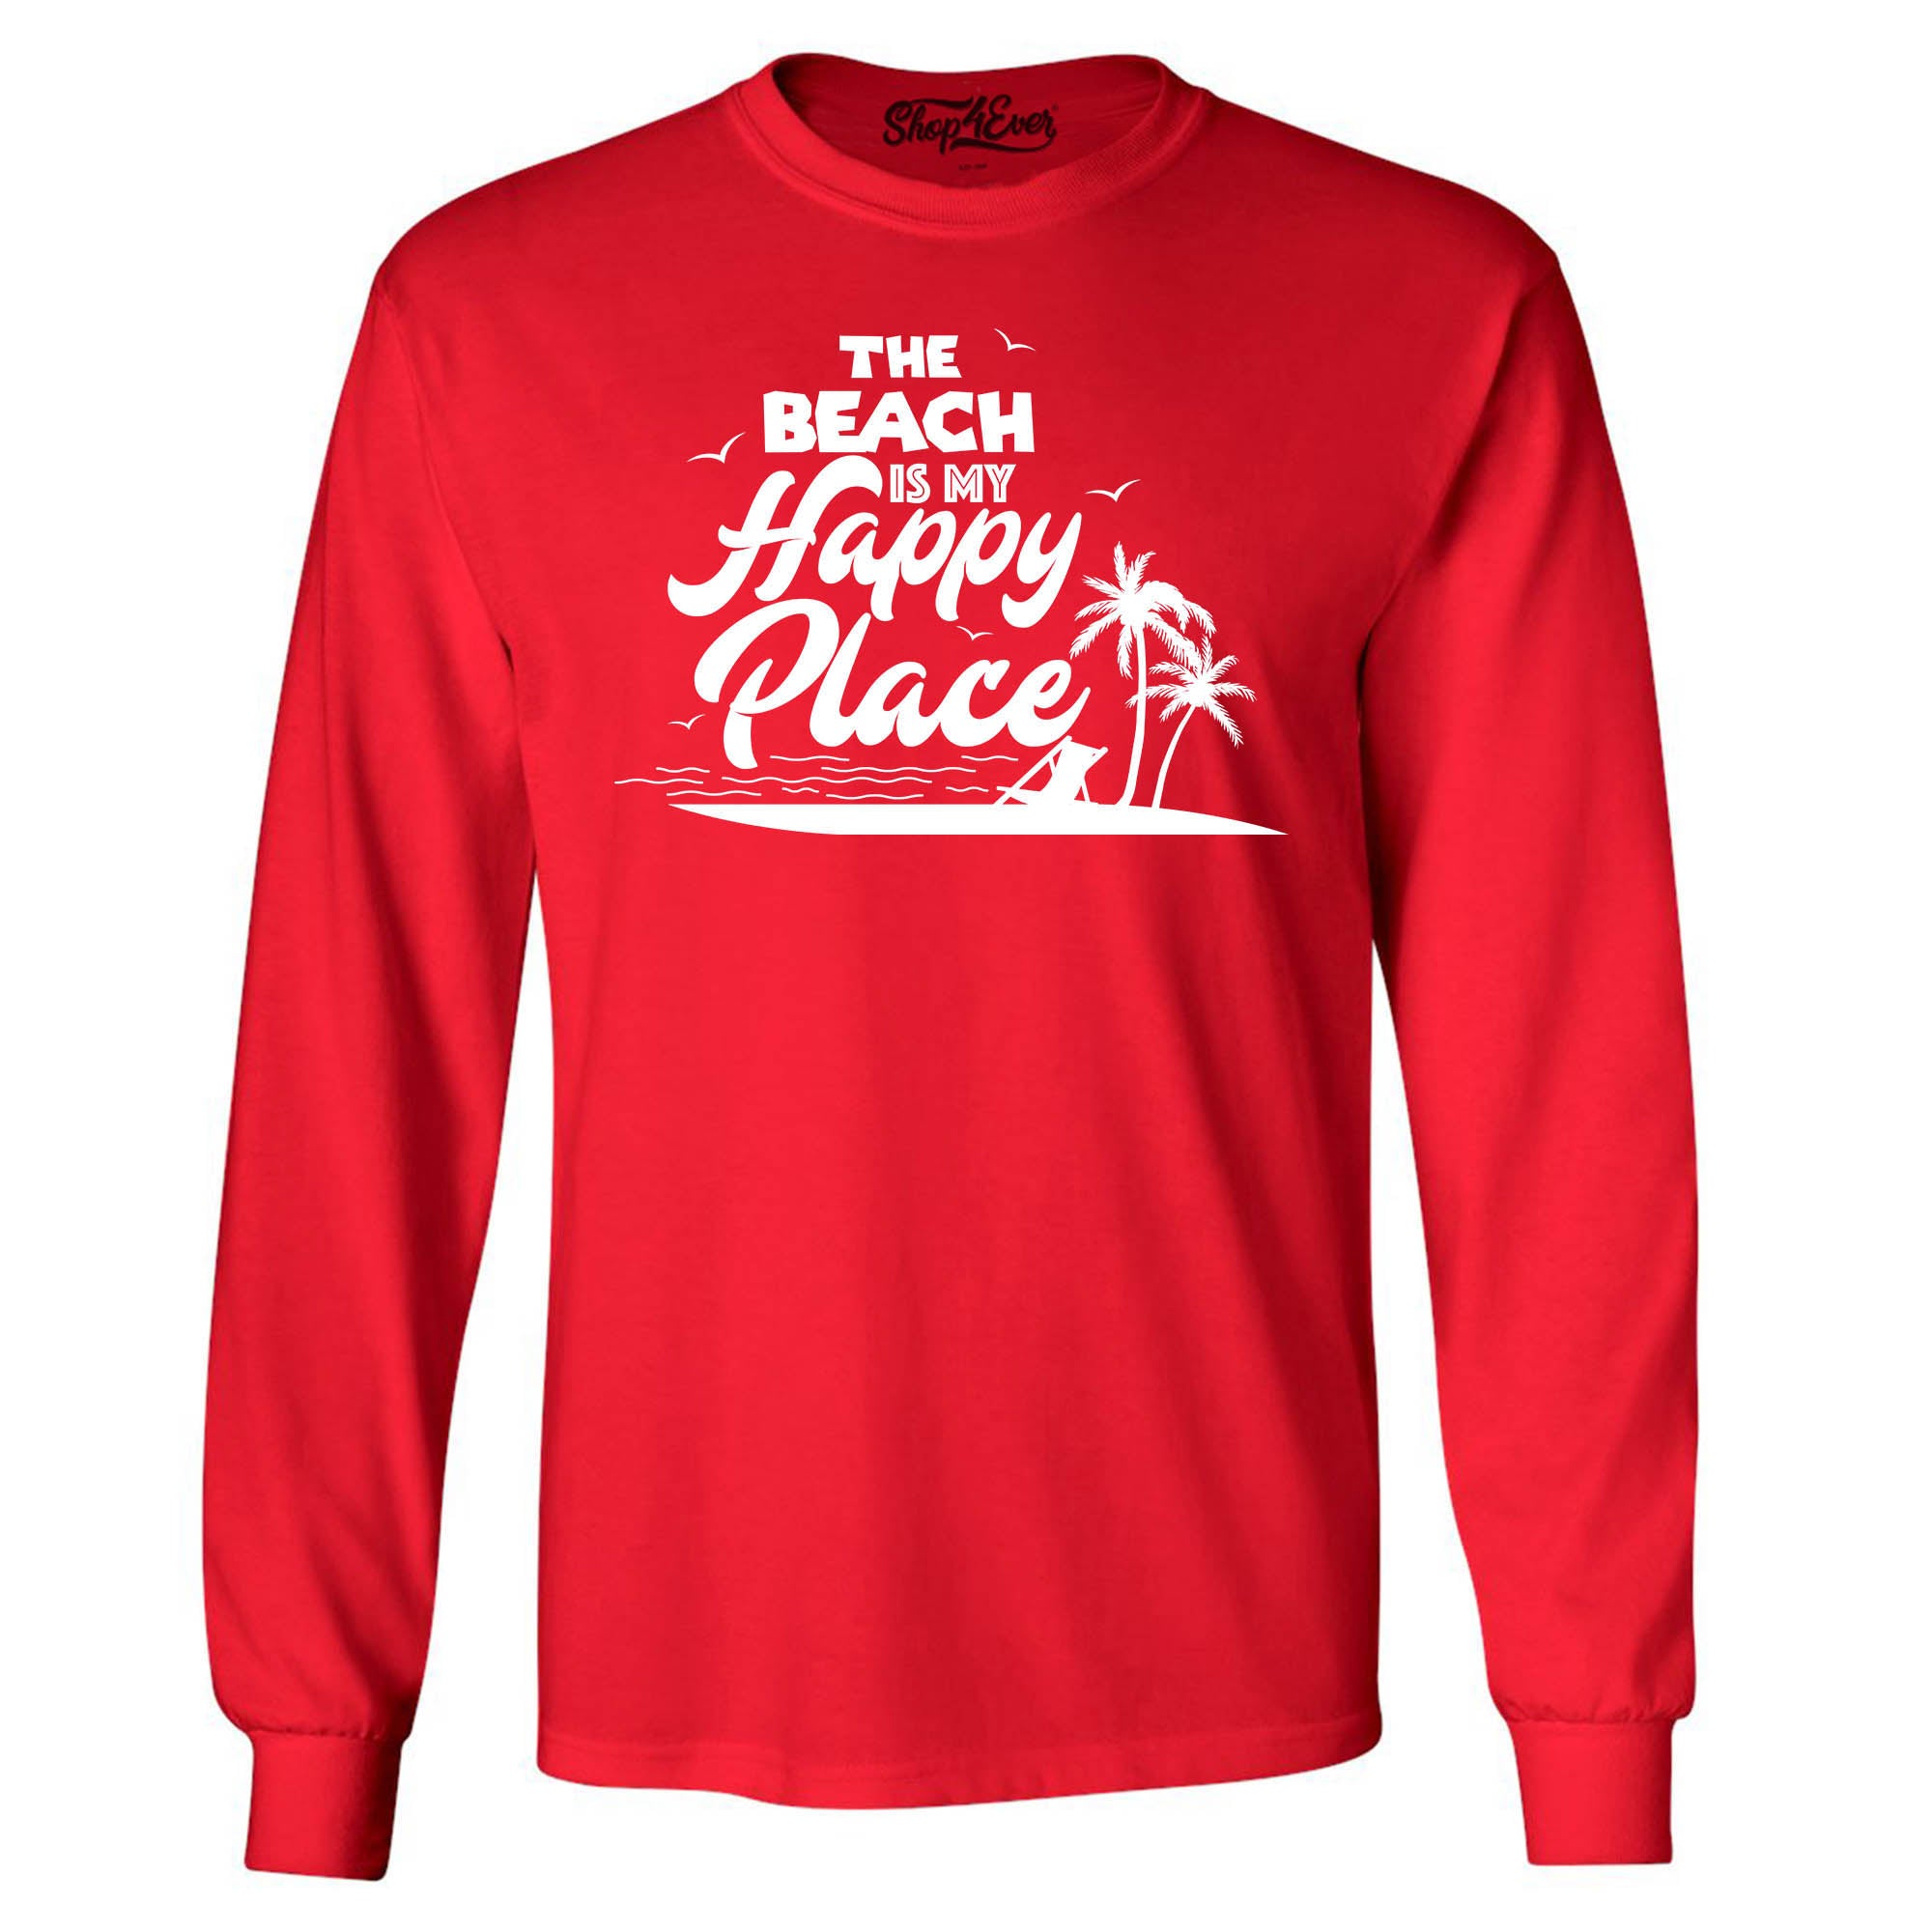 The Beach is My Happy Place Men's Long Sleeve Shirt